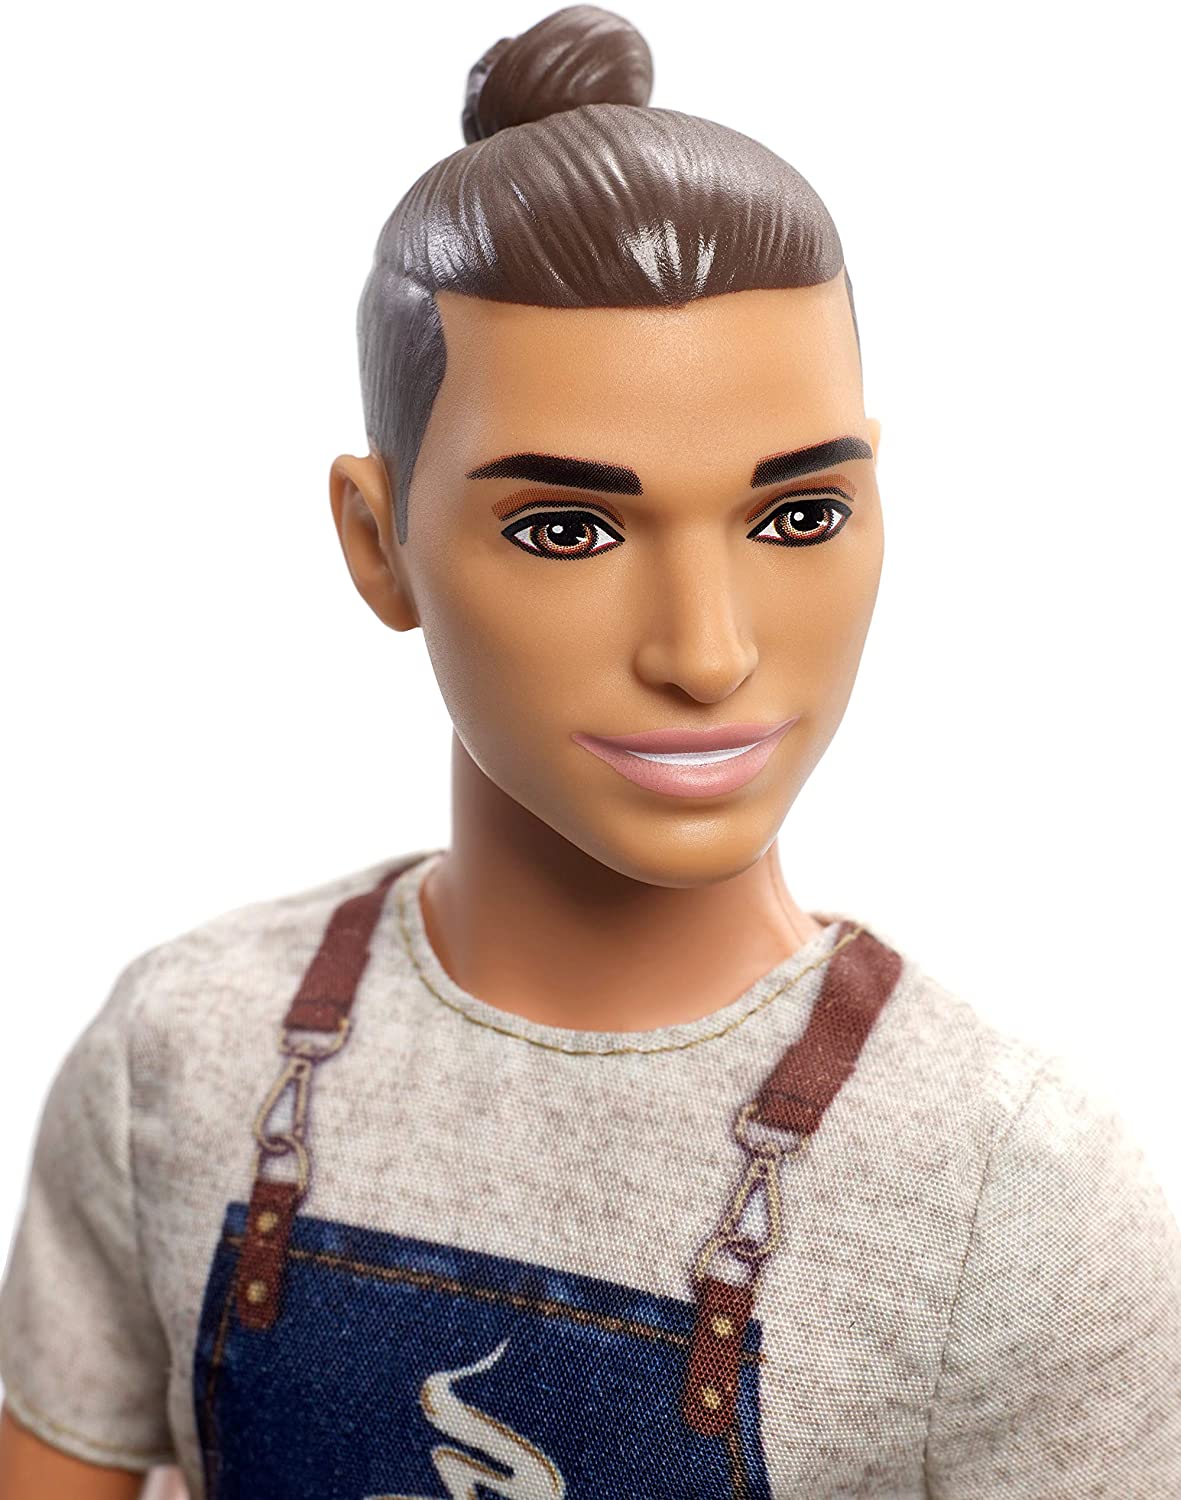 Barbie Ken Careers Barista Doll with Coffee-Themed Accessories - Regul –